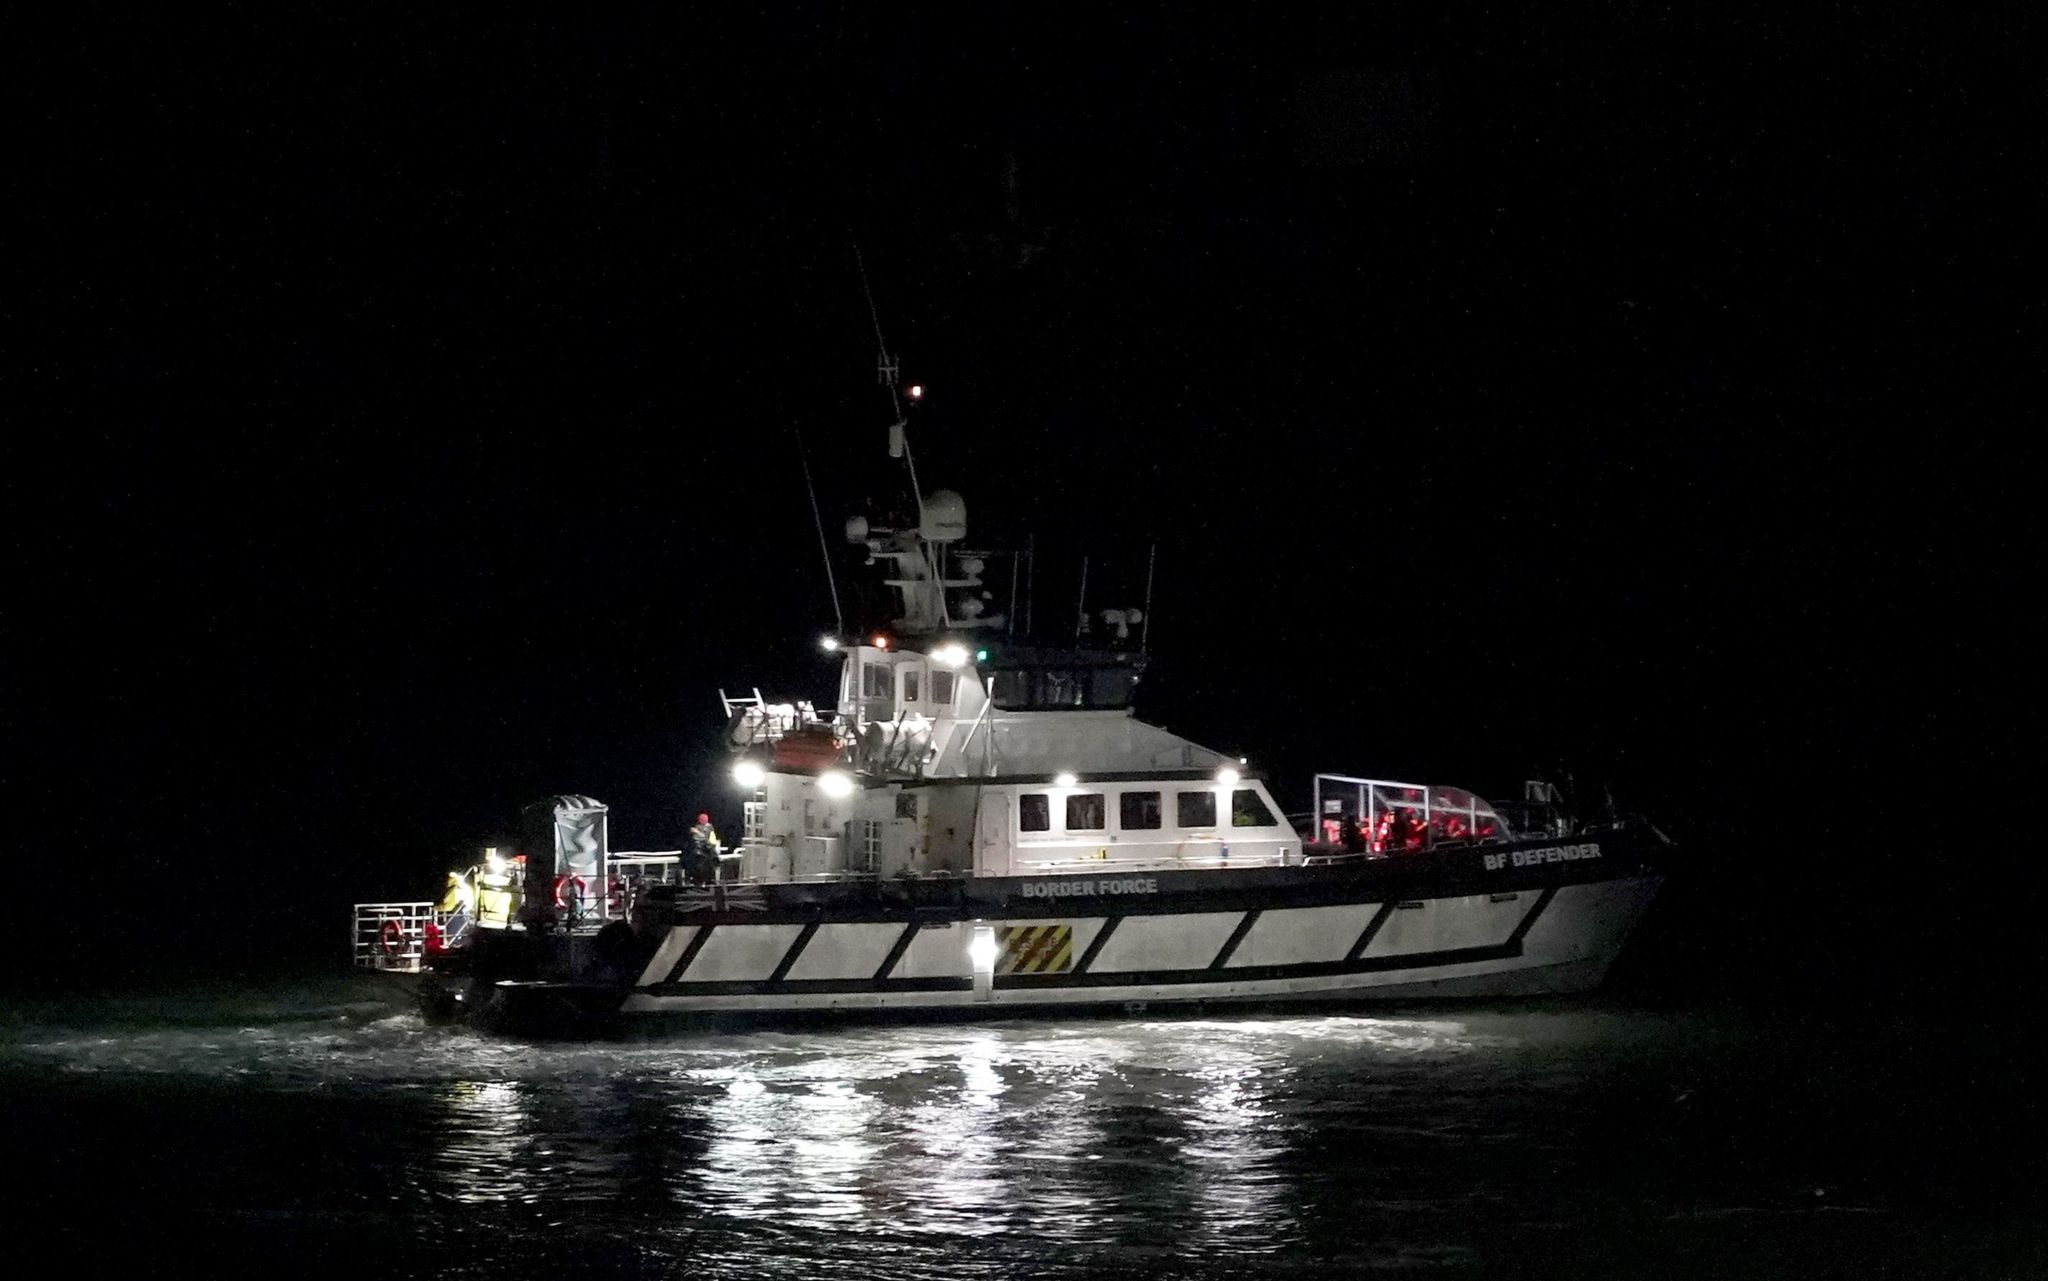 A black and white Border Force boat with lights beaming out in the dark